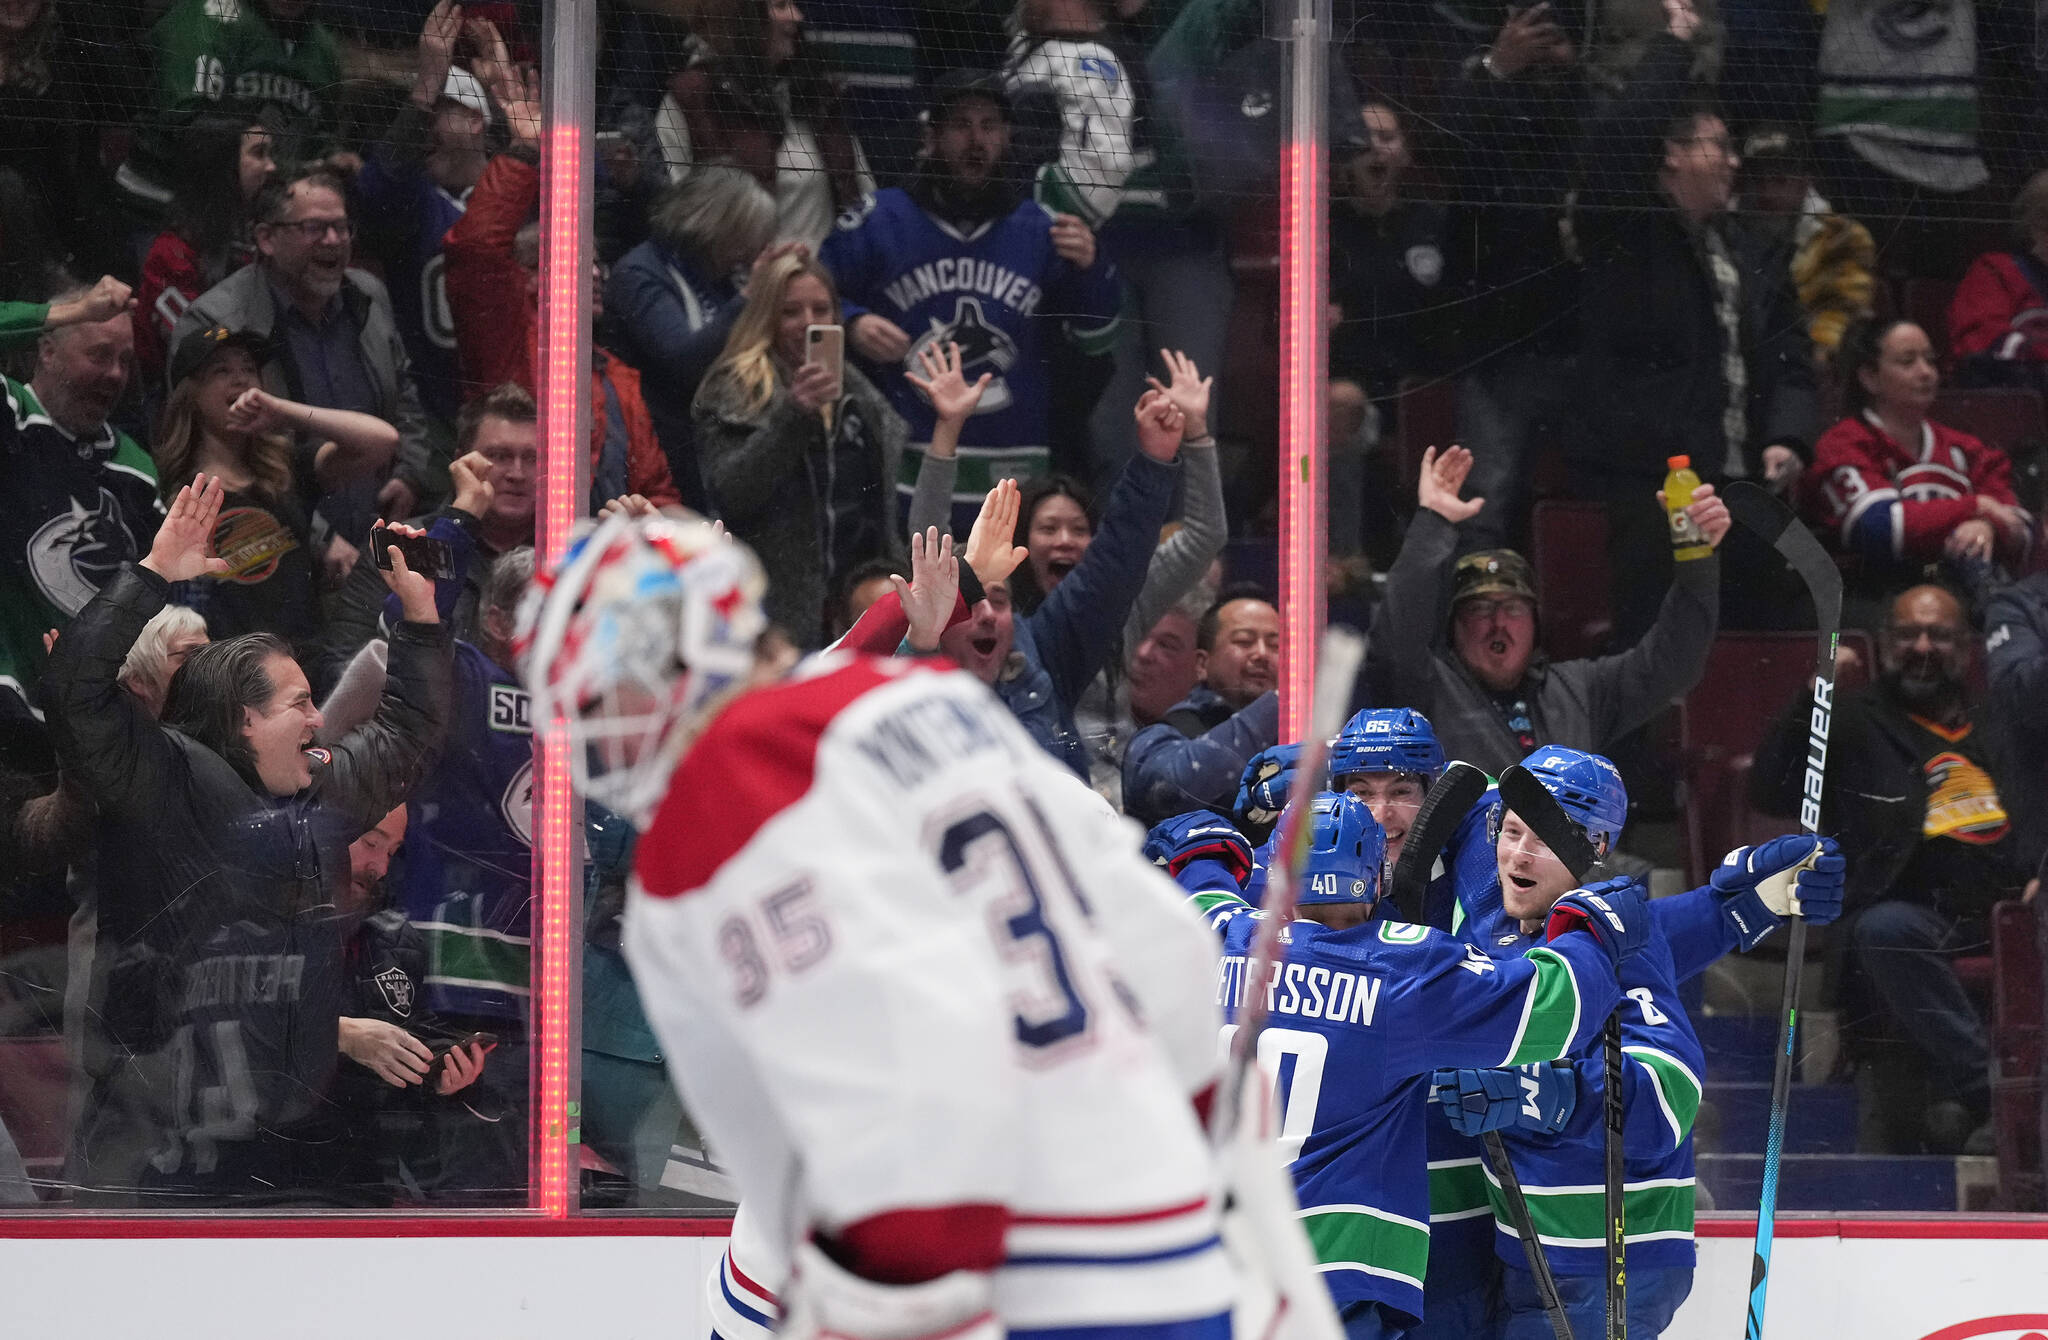 Vancouver Canucks’ Ilya Mikheyev, back, of Russia, Brock Boeser, back right, and Elias Pettersson celebrate Mikheyev’s goal against Montreal Canadiens goalie Sam Montembeault during the third period of an NHL hockey game in Vancouver, B.C., Monday, Dec. 5, 2022. THE CANADIAN PRESS/Darryl Dyck